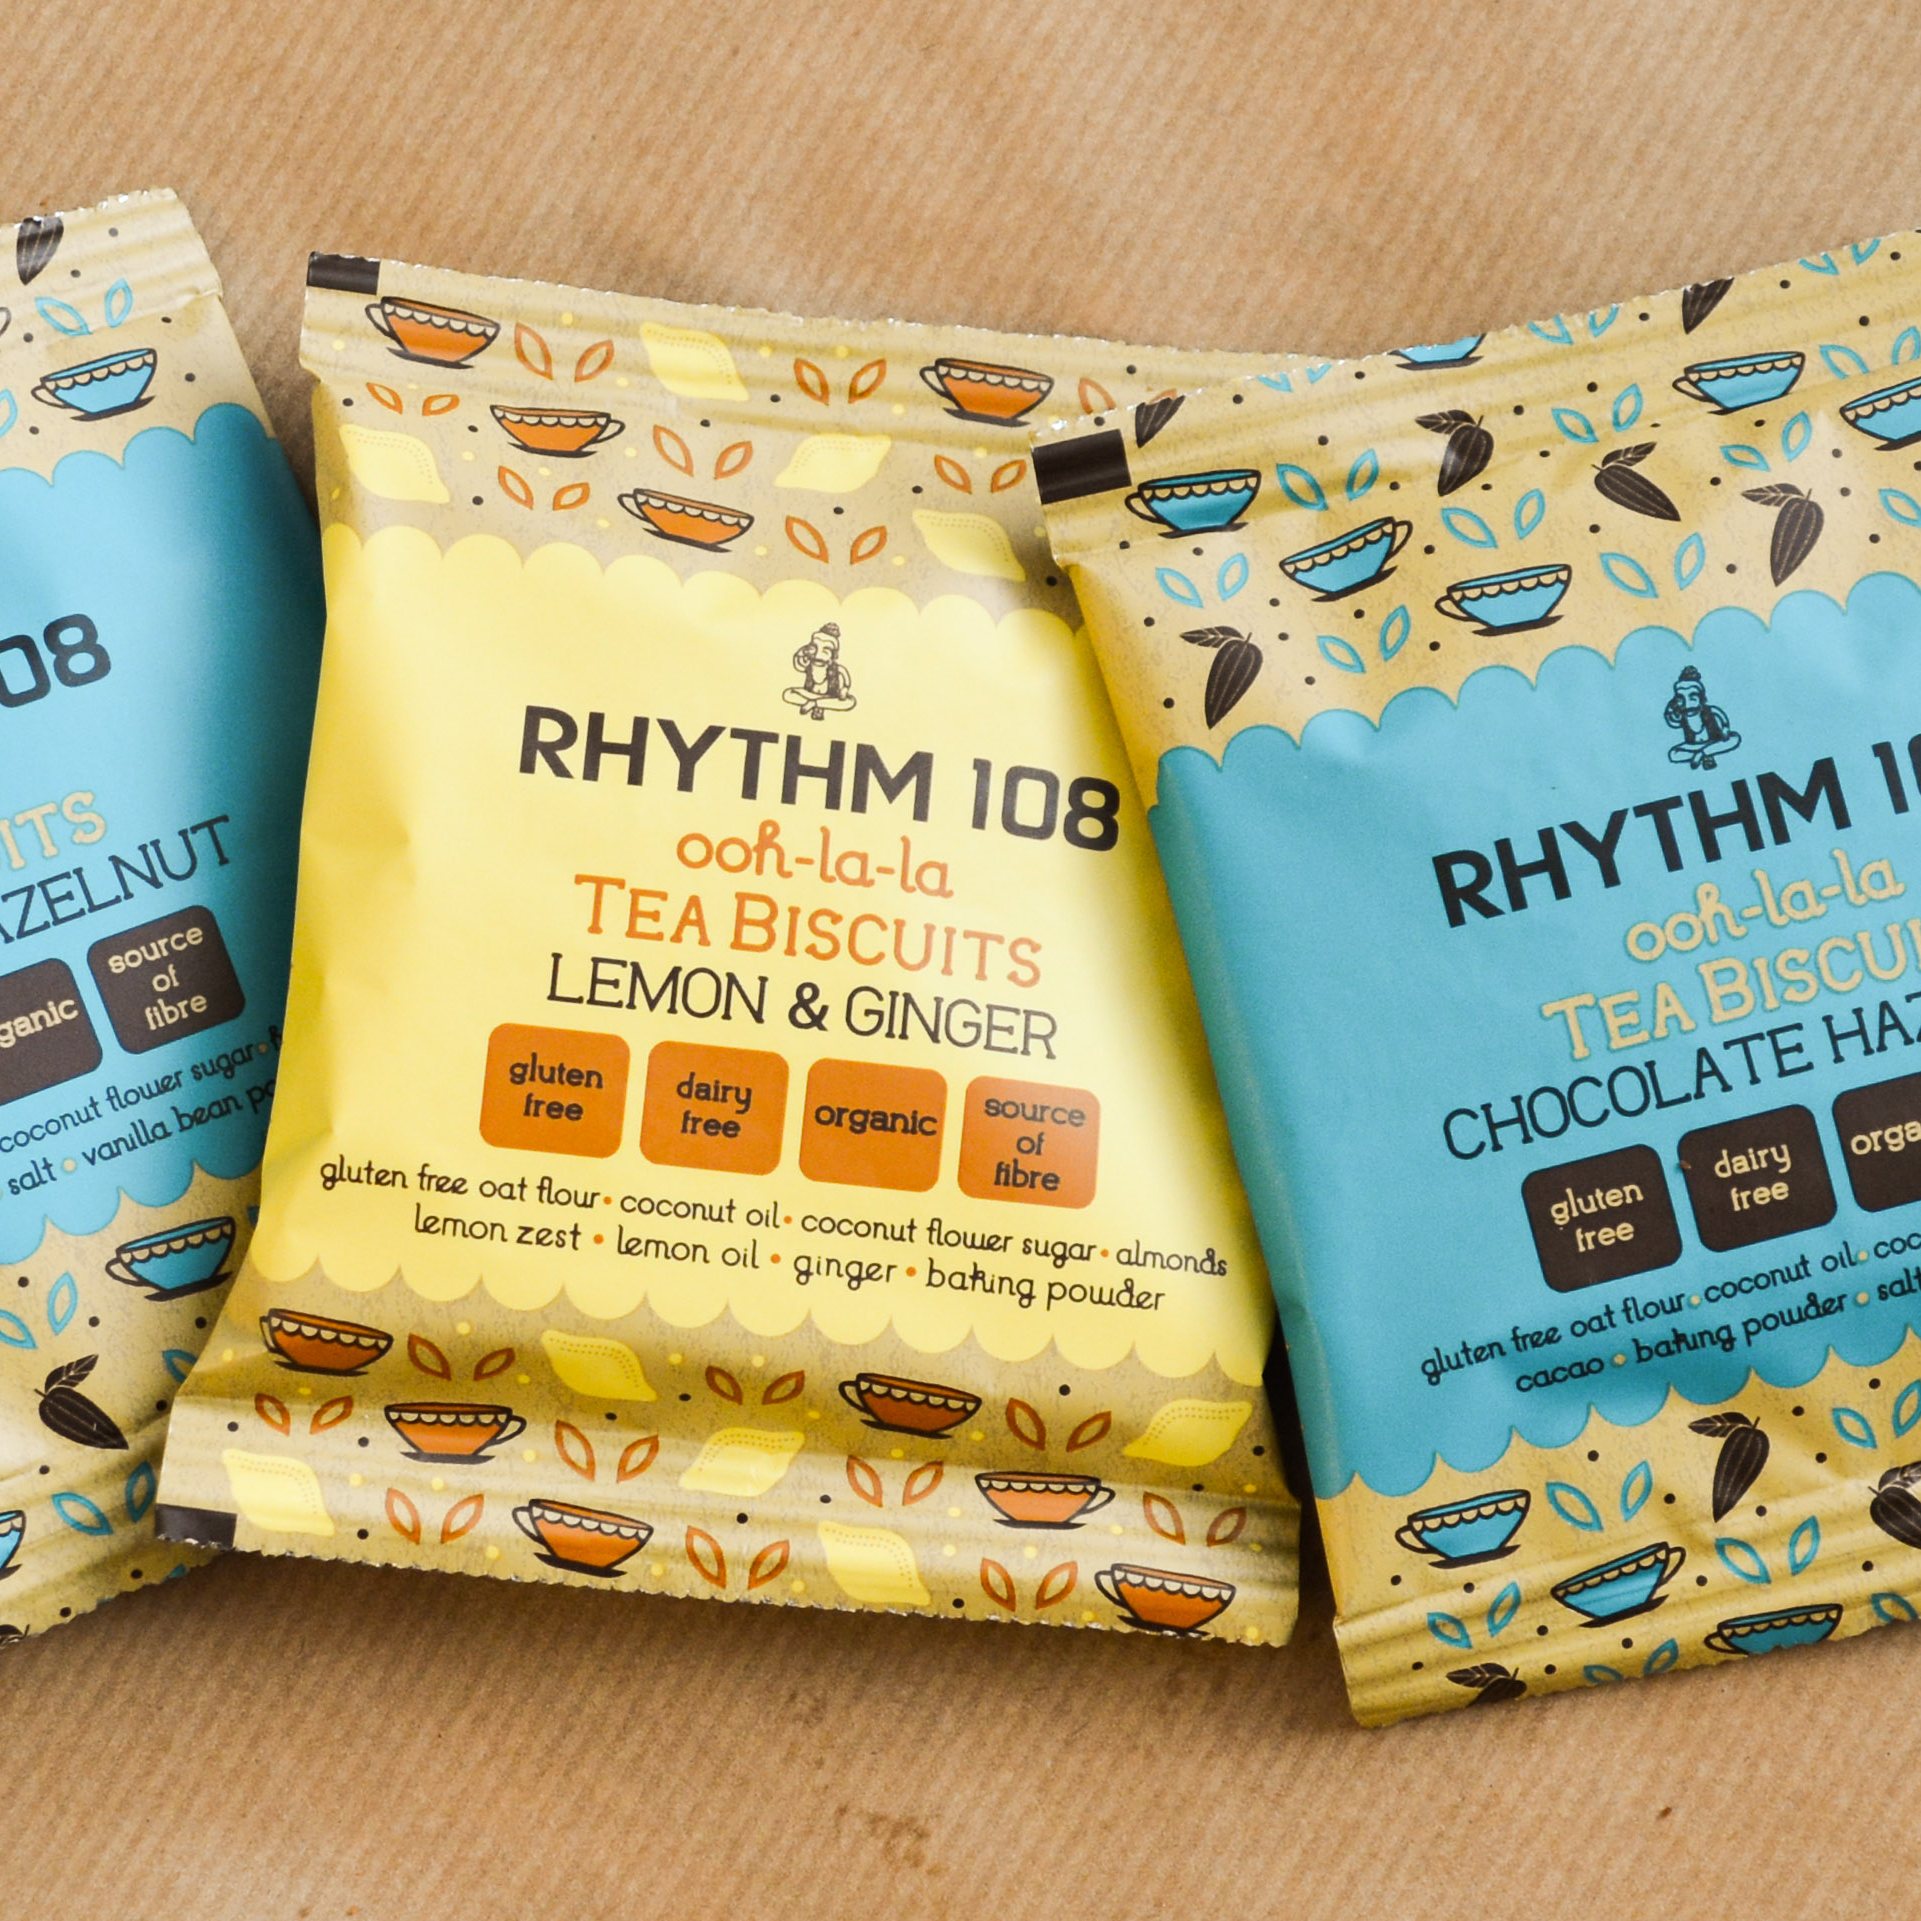 Rhythm 108’s Ooh-la-la Tea Biscuit Will Have Your Garden Saying More, Please